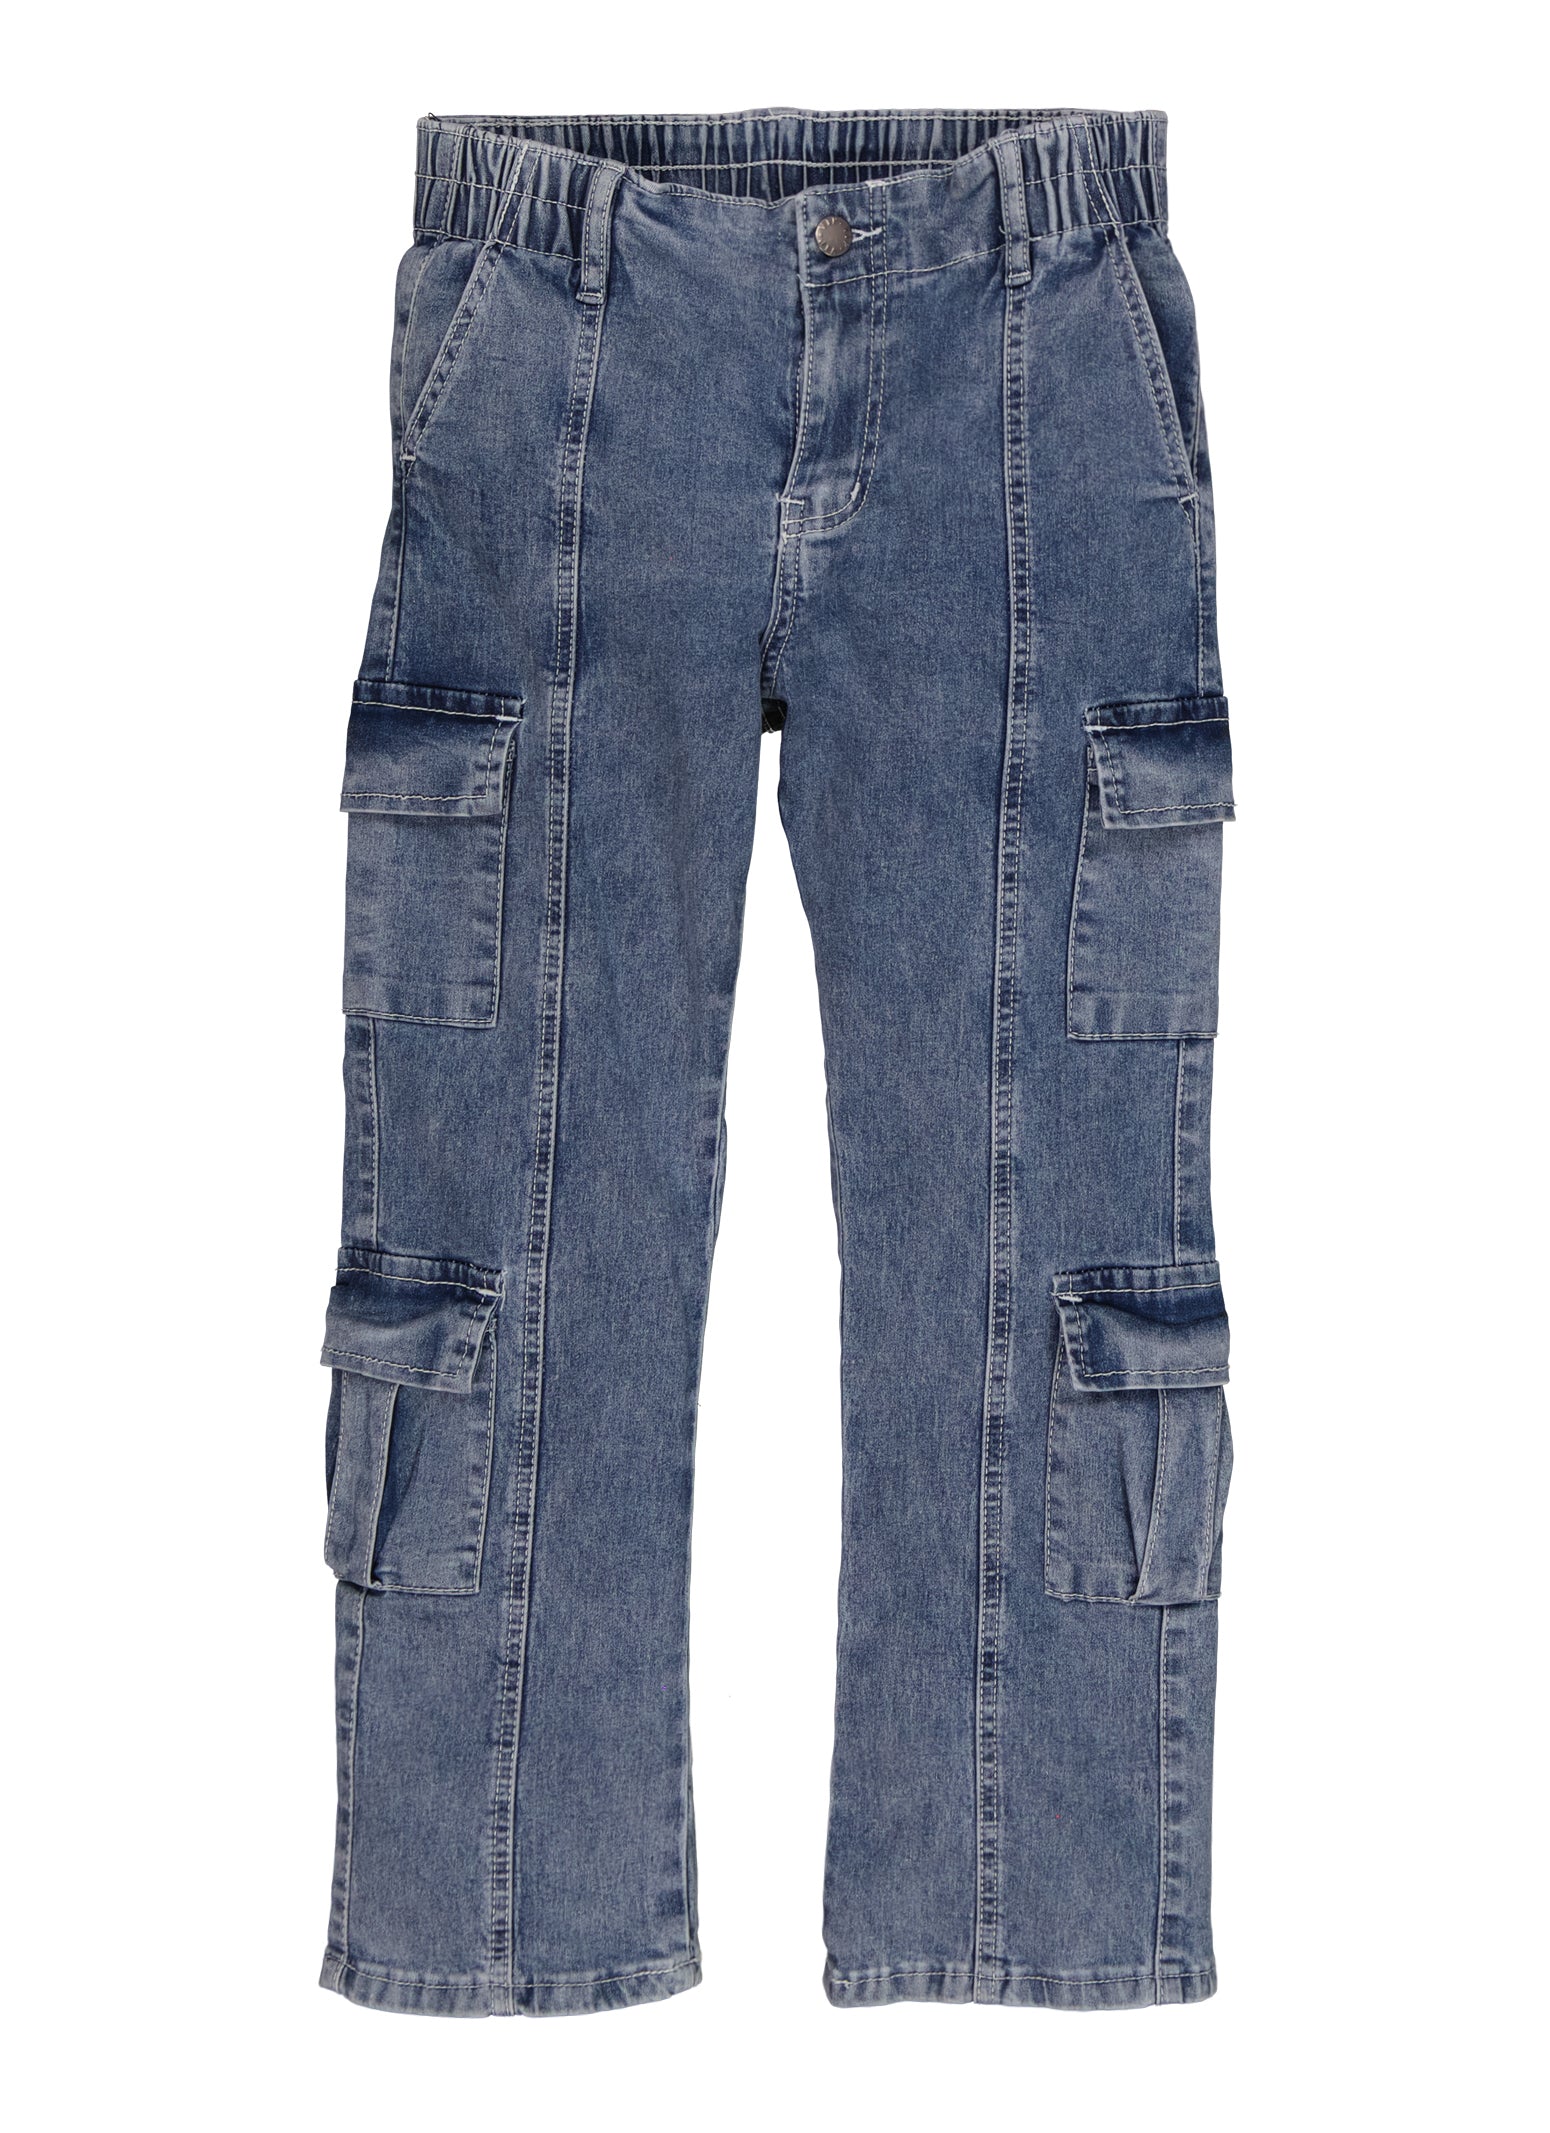 Girls Blue Jeans - Buy Girls Blue Jeans online in India